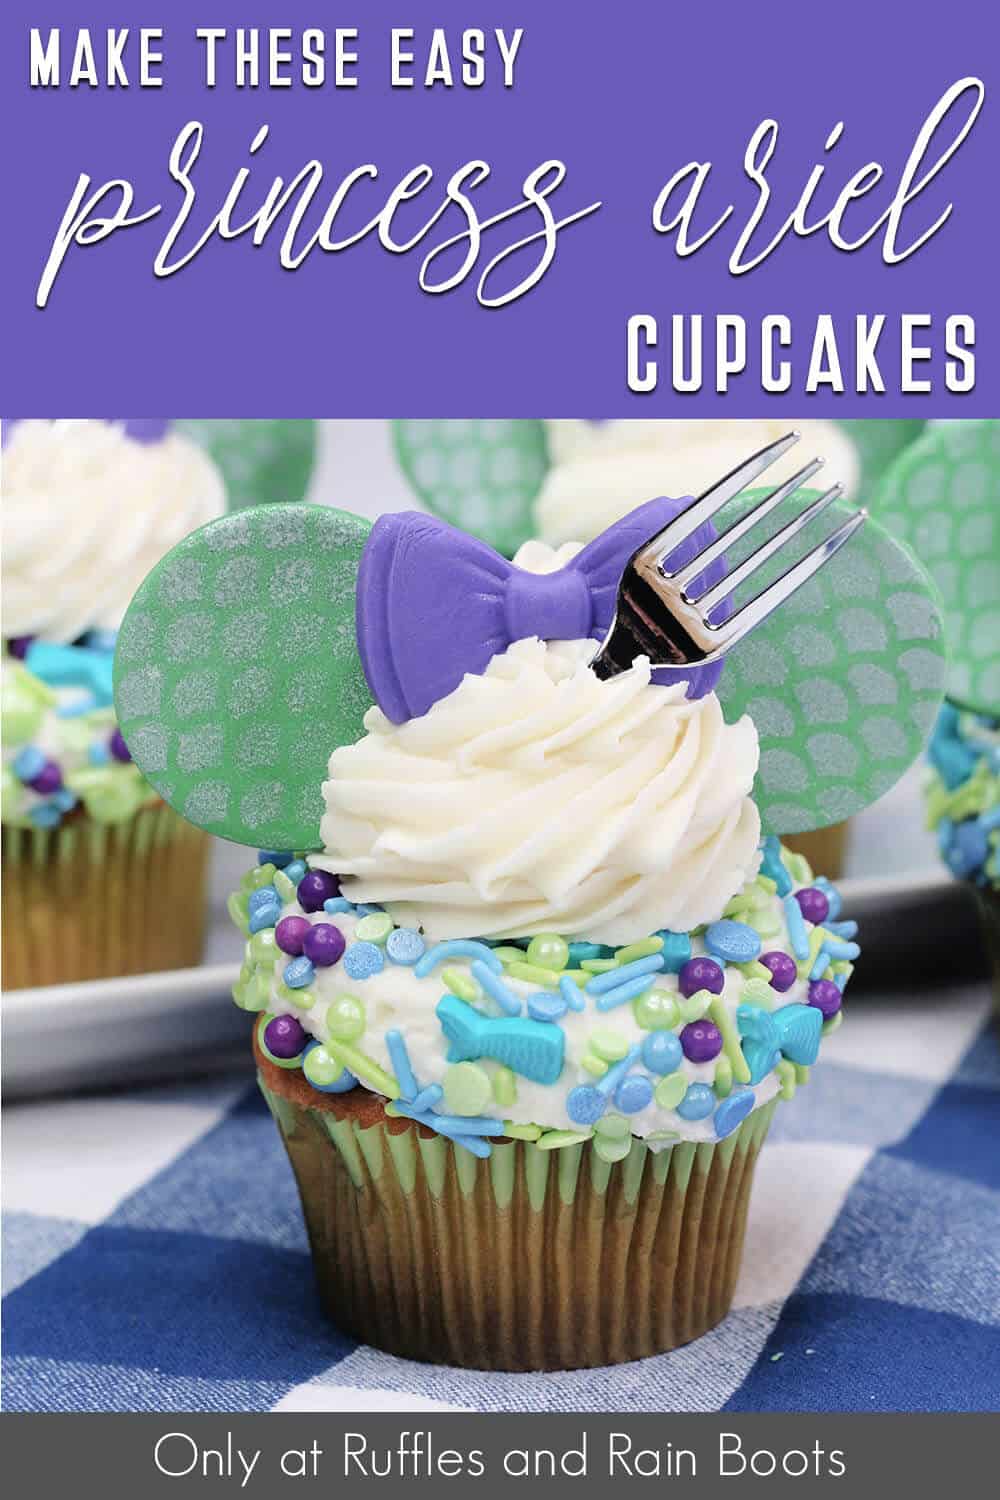 disney little mermaid princess ariel cupcakes with text which reads make these easy princes ariel cupcakes